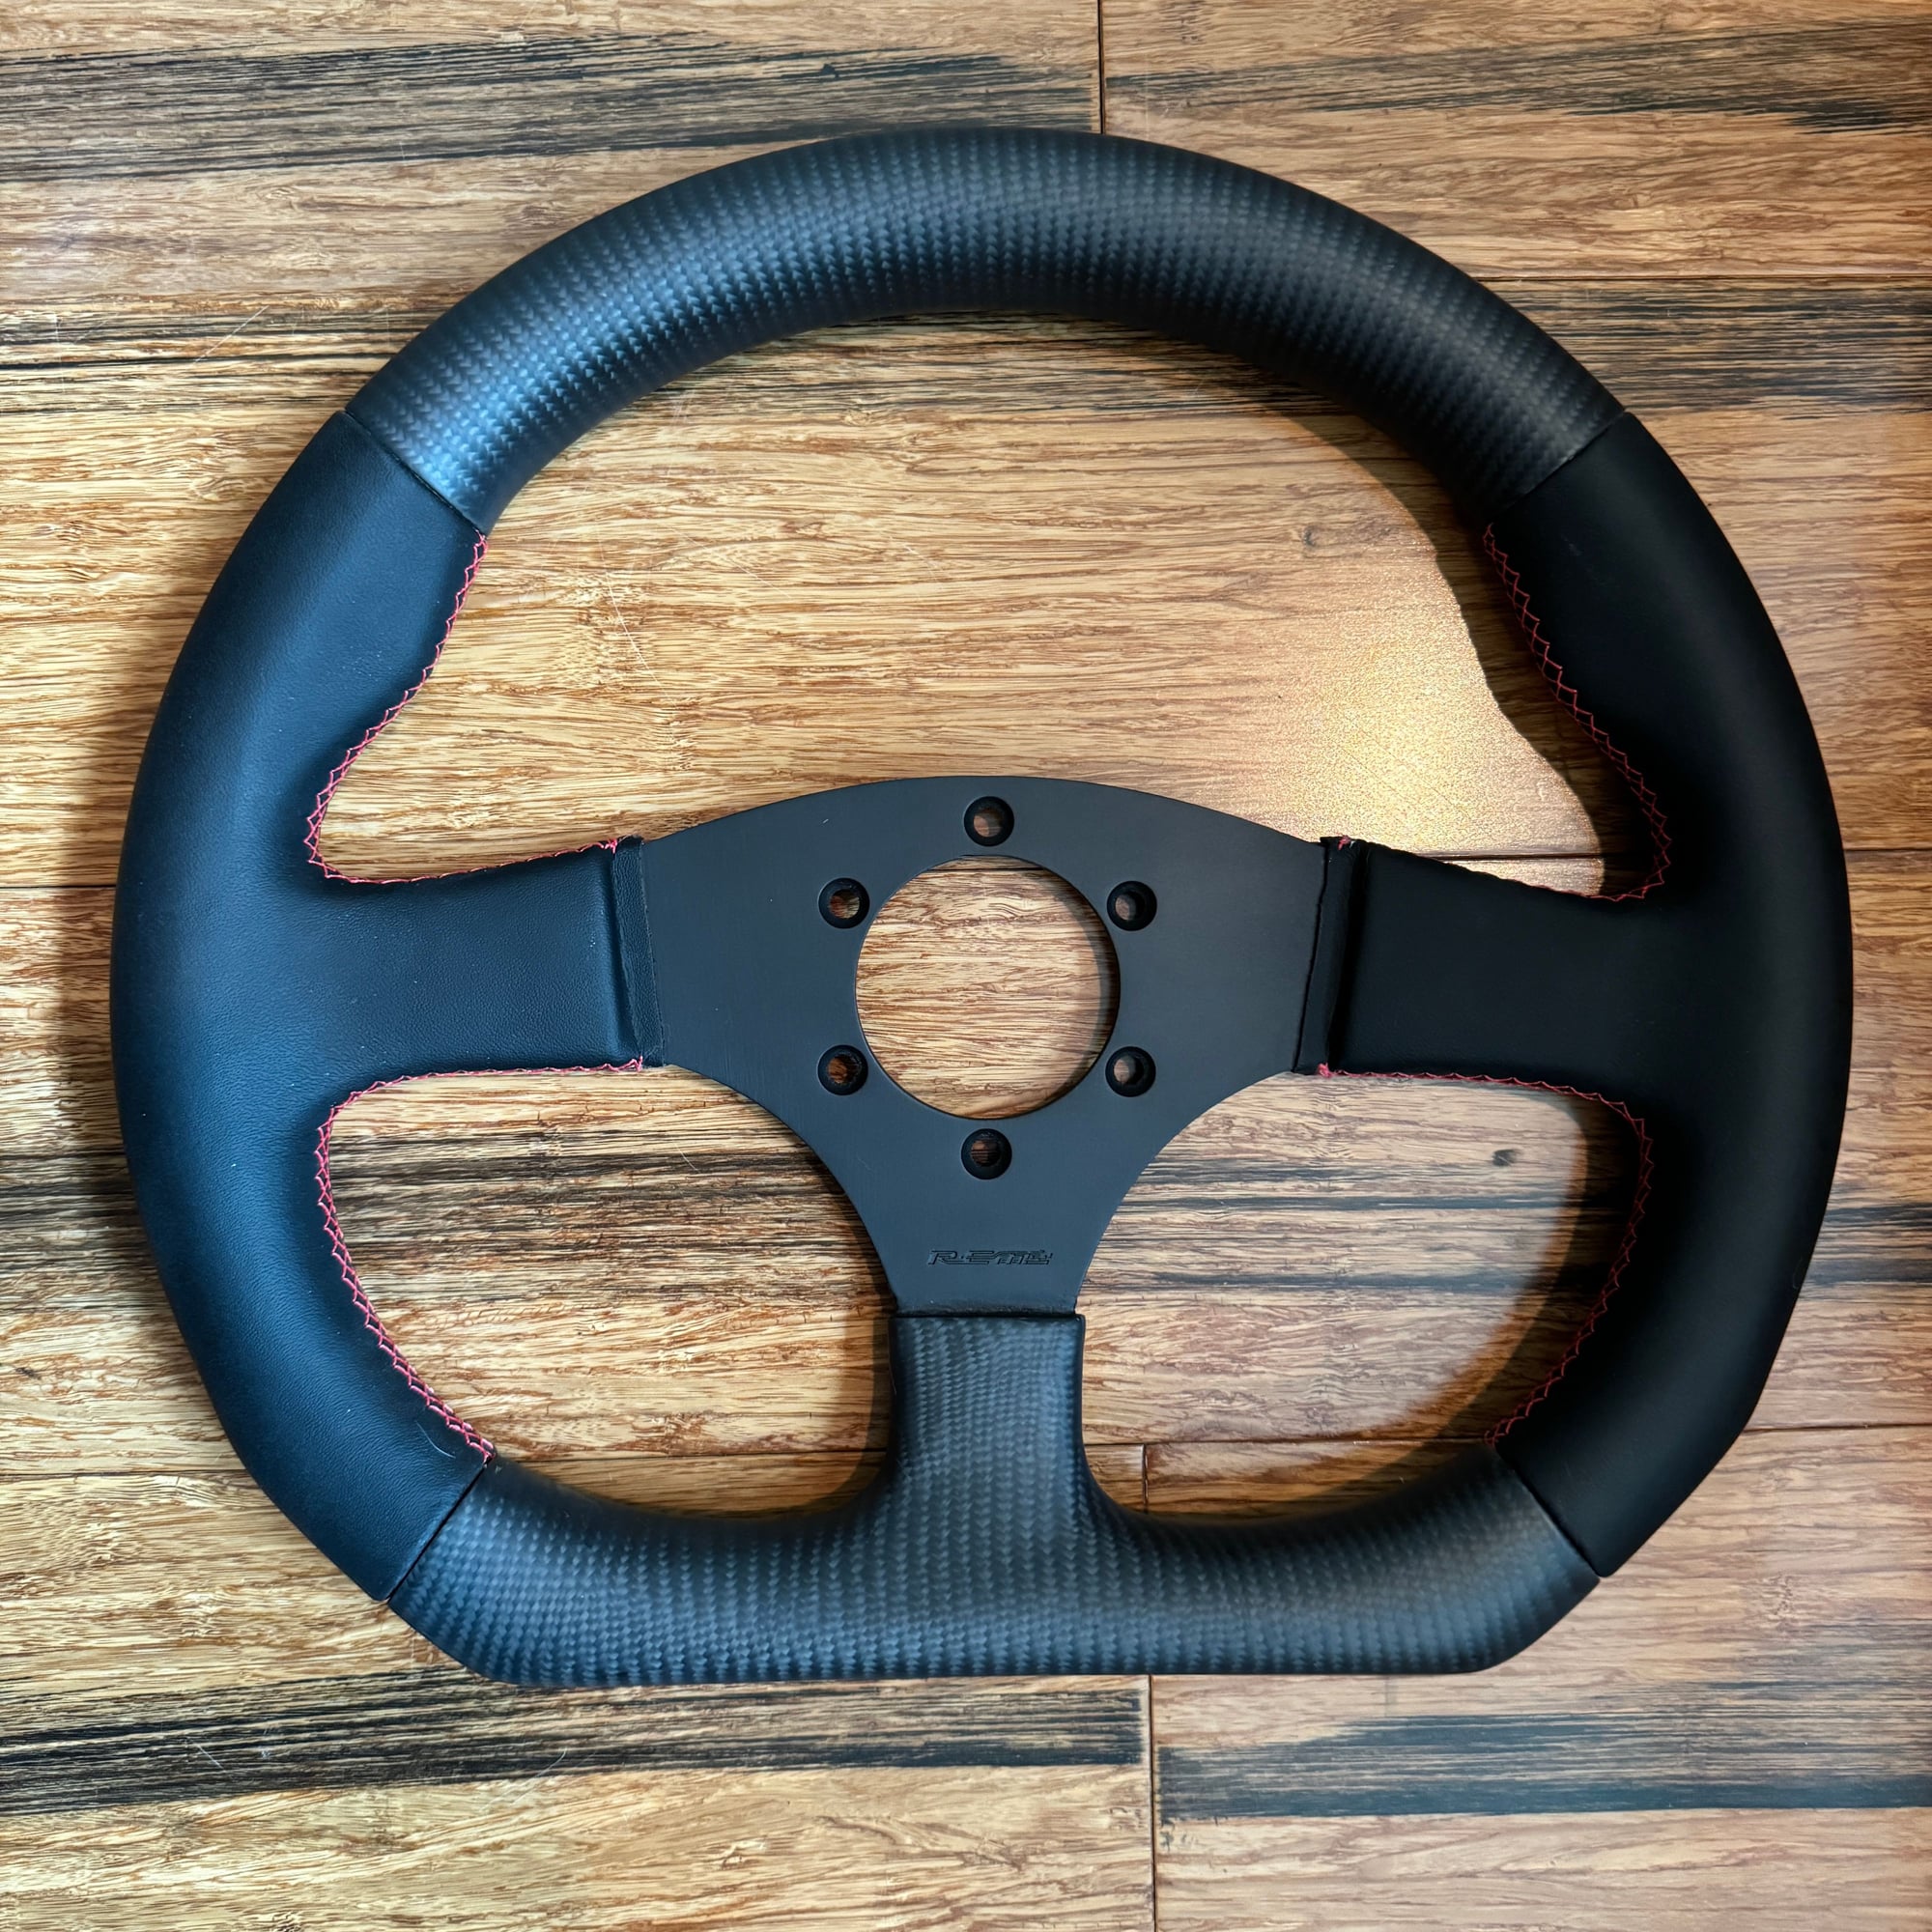 Interior/Upholstery - RE-Amemiya D-Cut Carbon / Leather Steering Wheel - Used - 1992 to 2002 Mazda RX-7 - Birmingham, MI 48323, United States